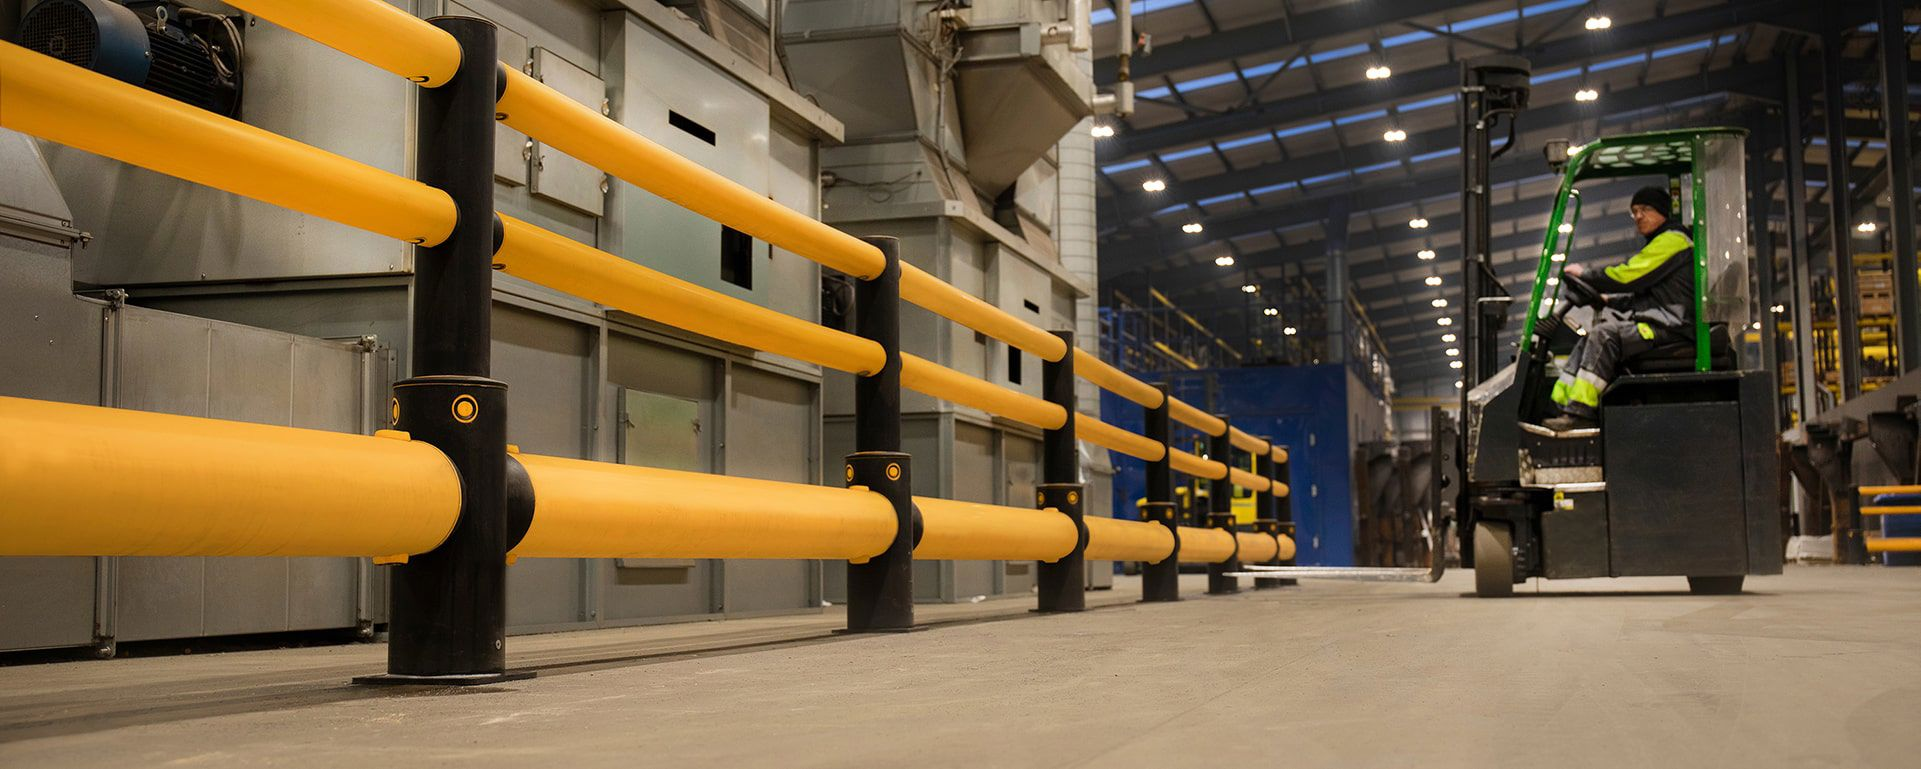 Traffic safety warehouse barriers at Combilift